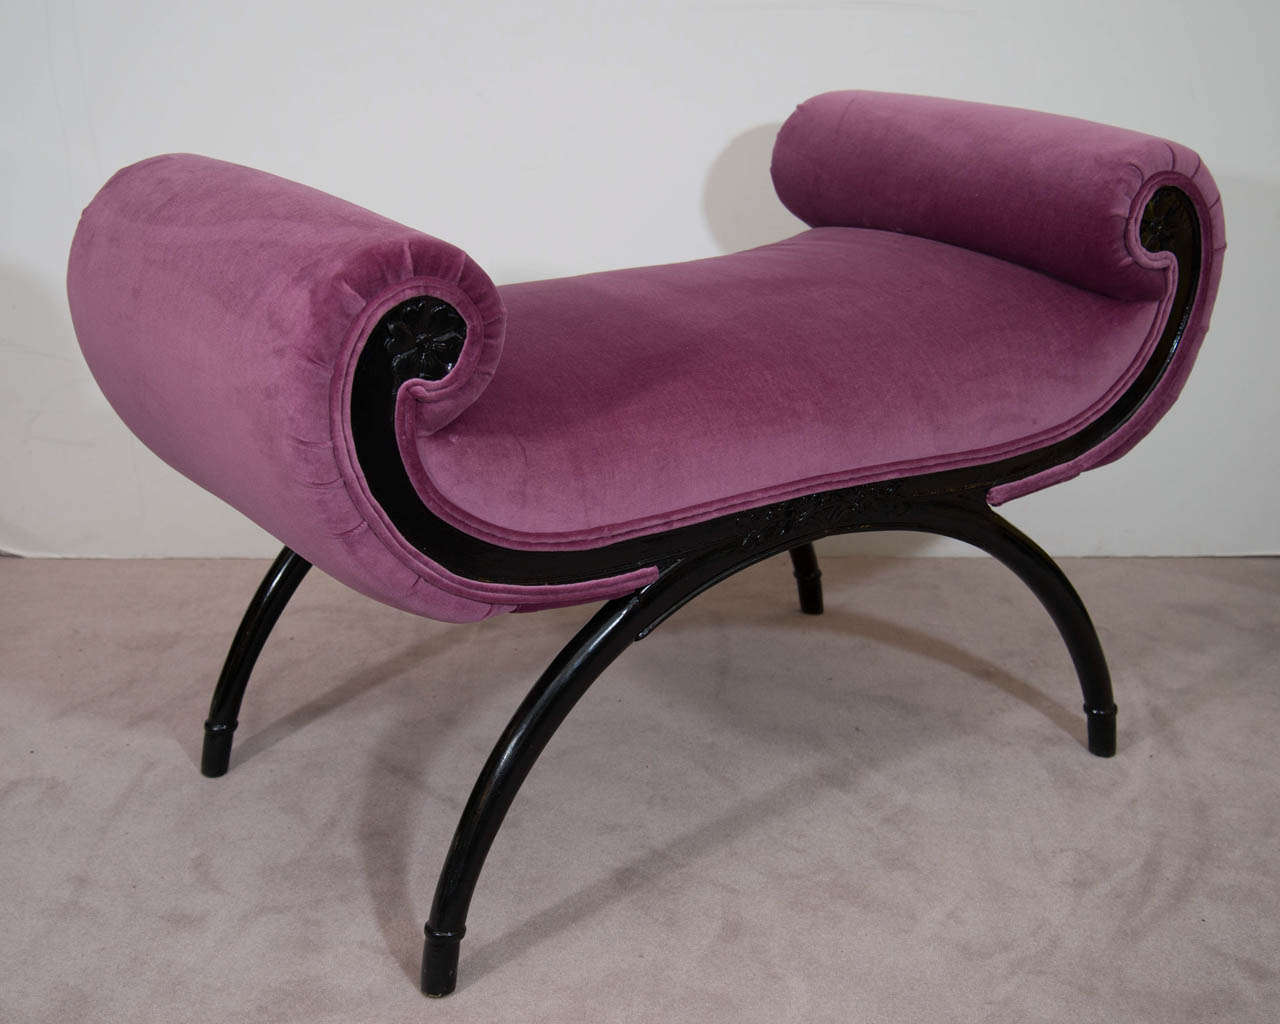 A  Hollywood Regency ebonized wood scroll arm bench newly reupholstered in an orchid velvet.